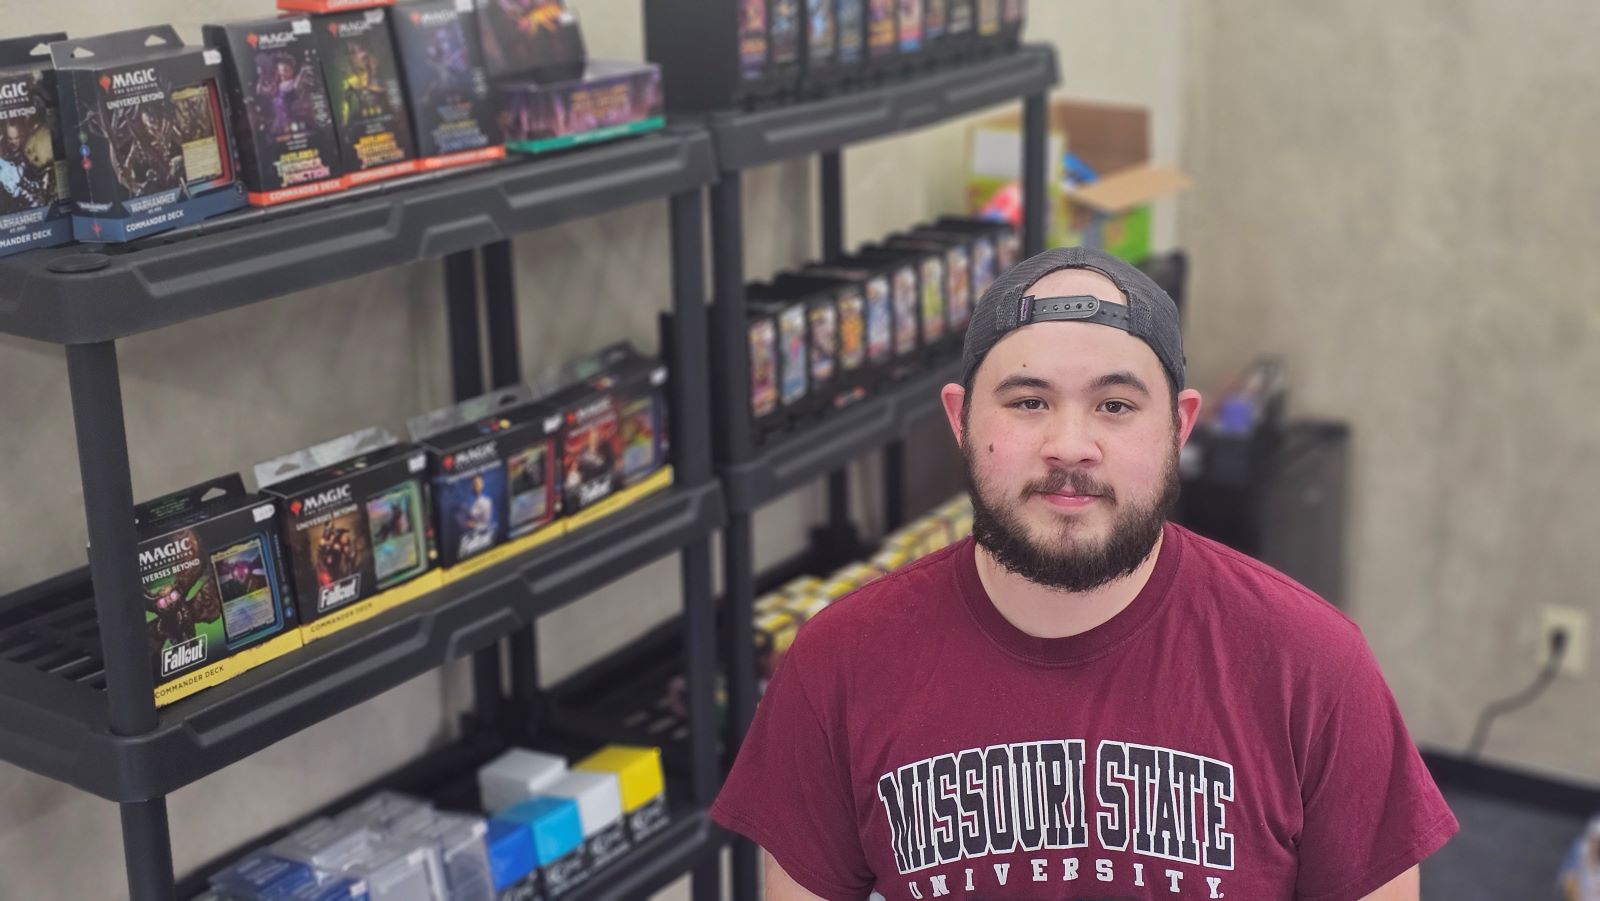 26-year-old card game fanatic opens shop in southwest Springfield